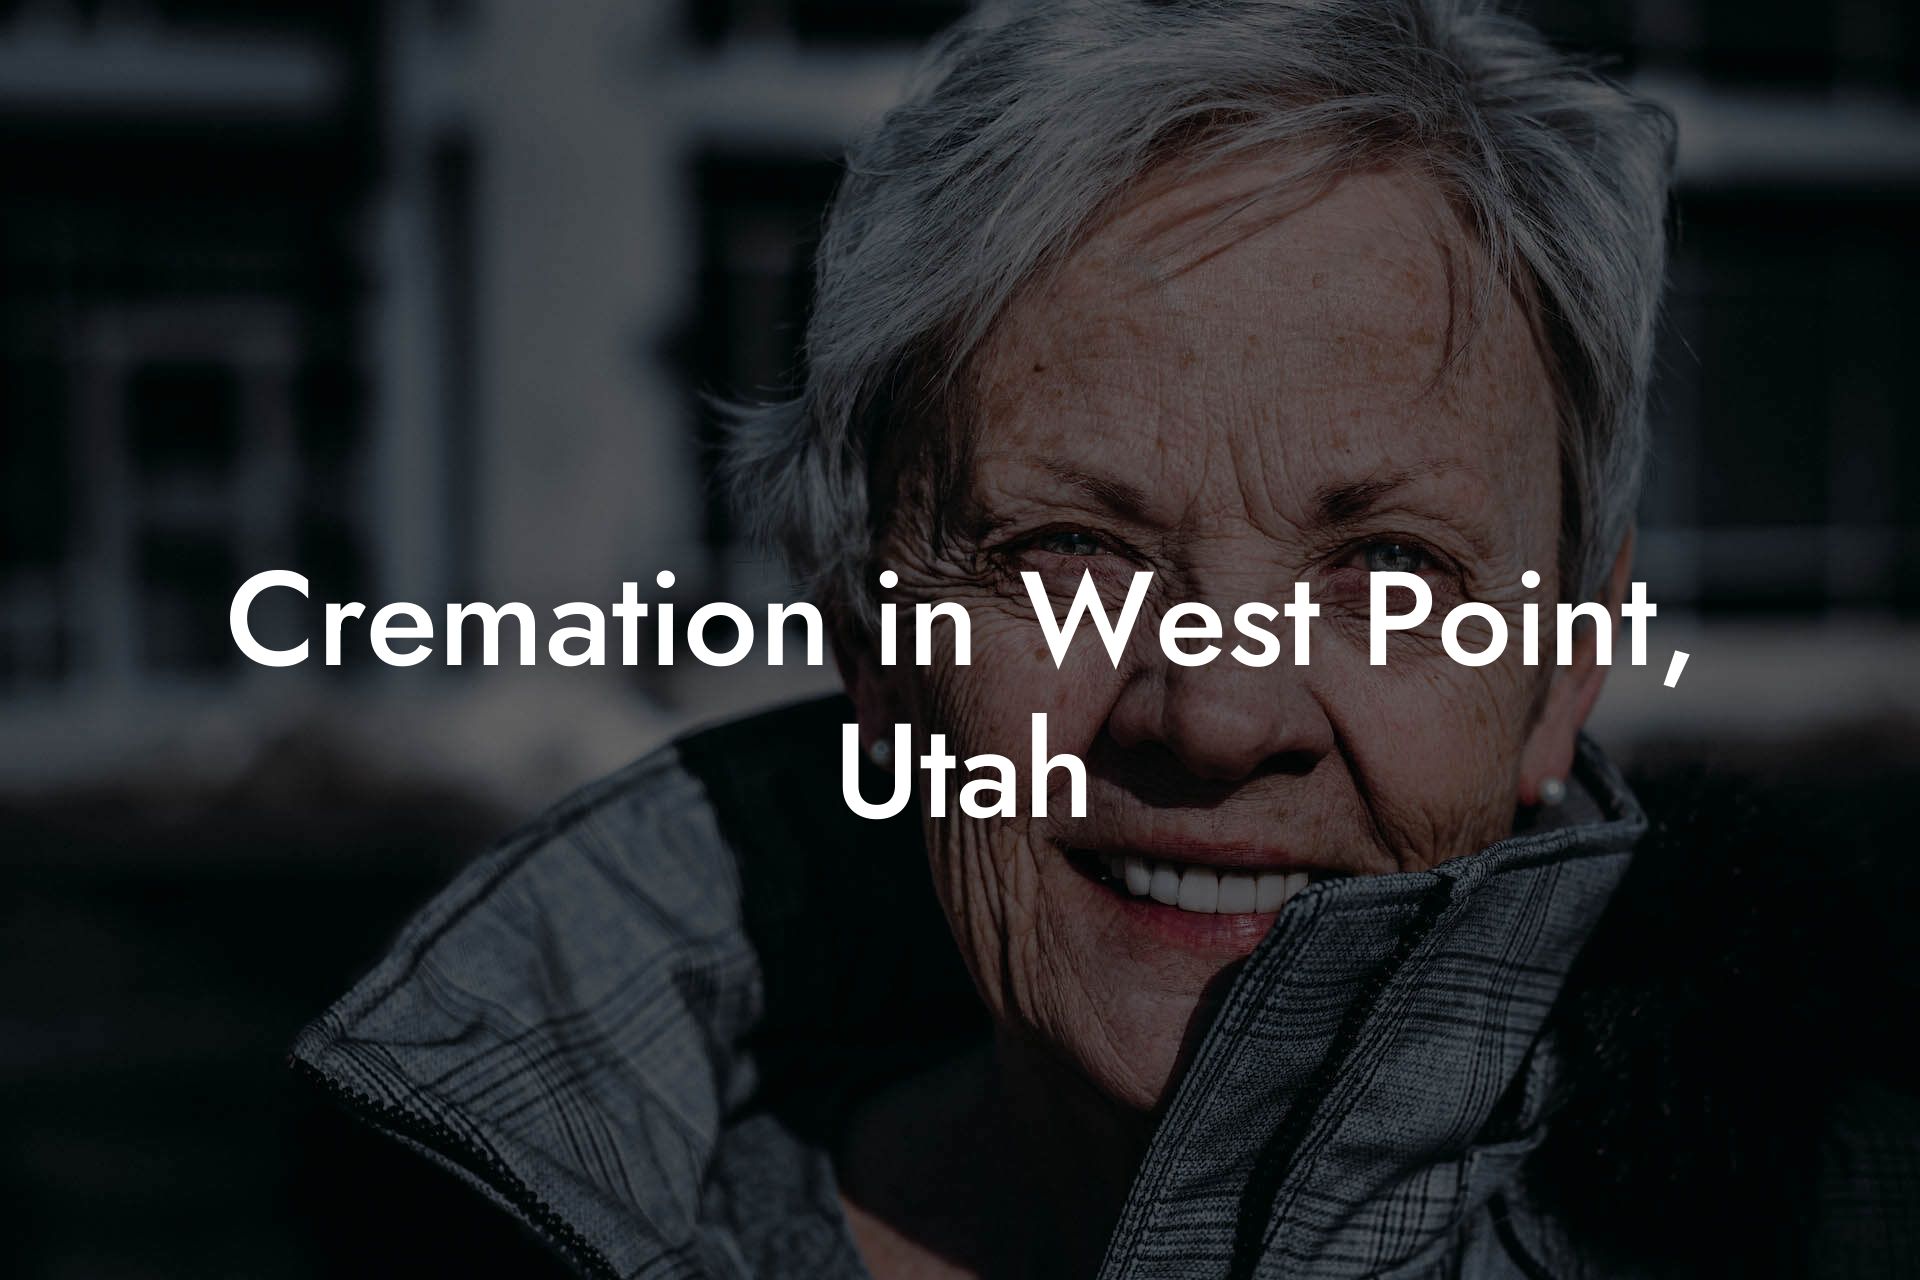 Cremation in West Point, Utah